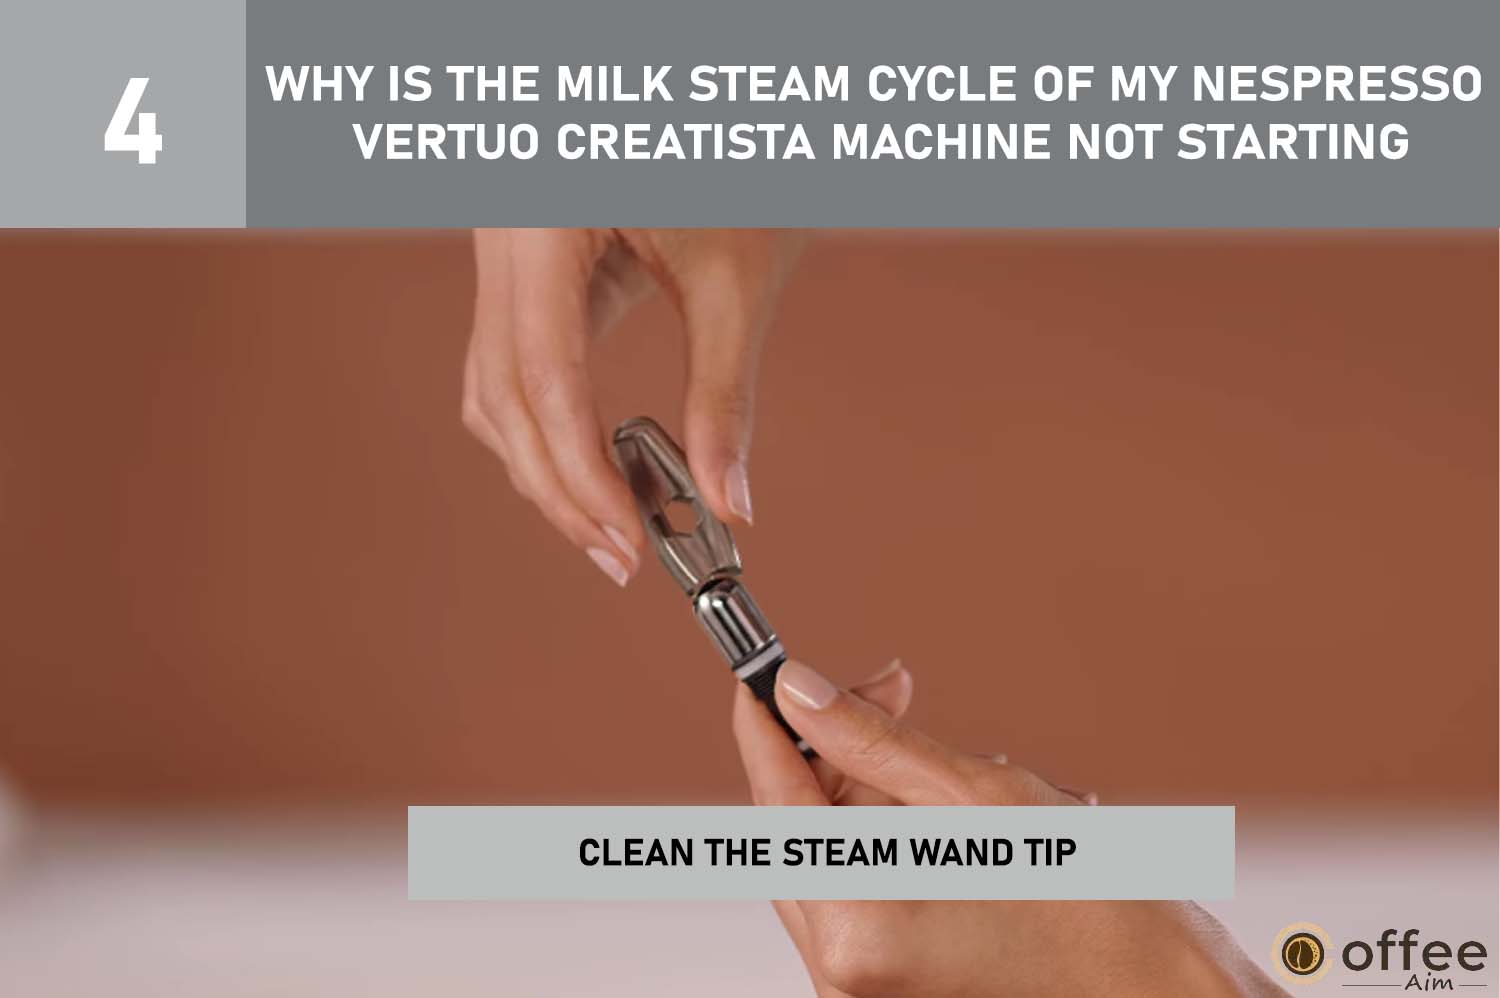 
To fix Nespresso Vertuo Creatista milk steaming issue, clean the steam wand tip. Follow steps in the article for help.